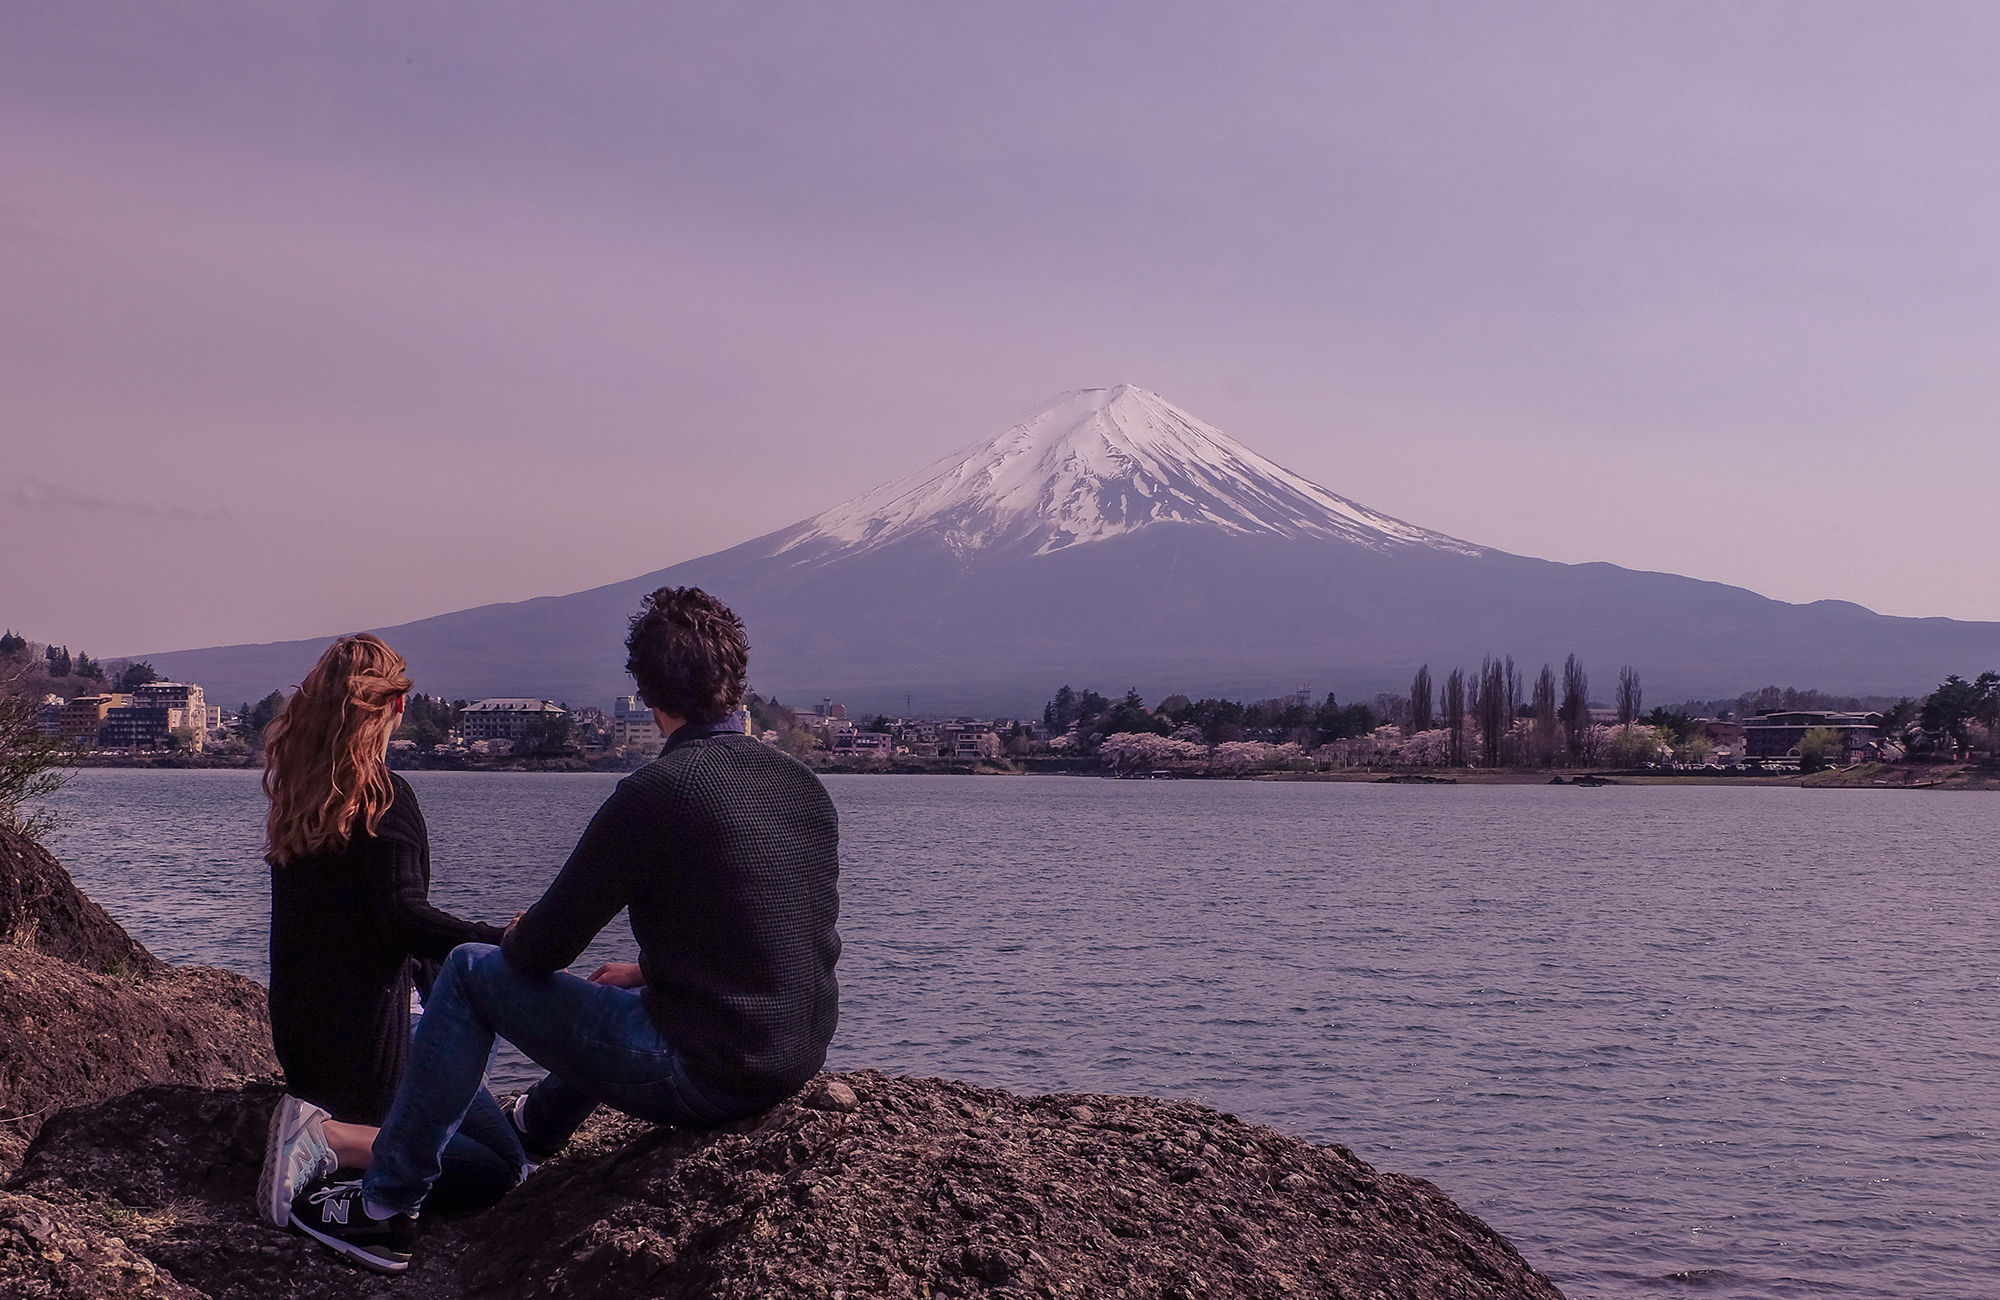 Cory and G seeing Mount Fuji during their 2 weeks in Japan itinerary